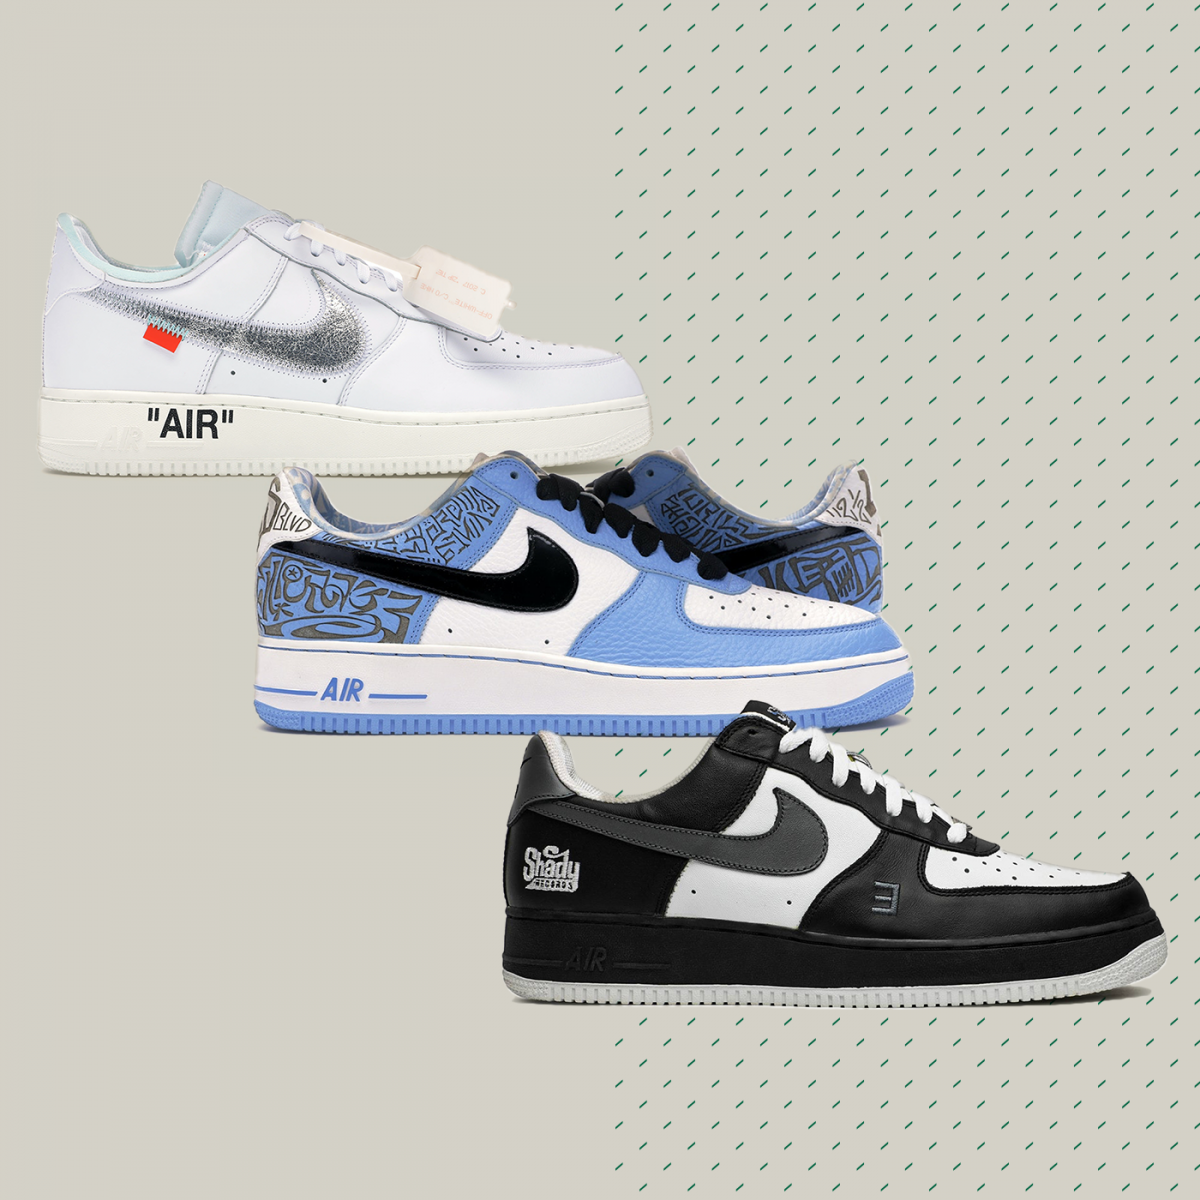 Nike Air Force The Buyer's - News